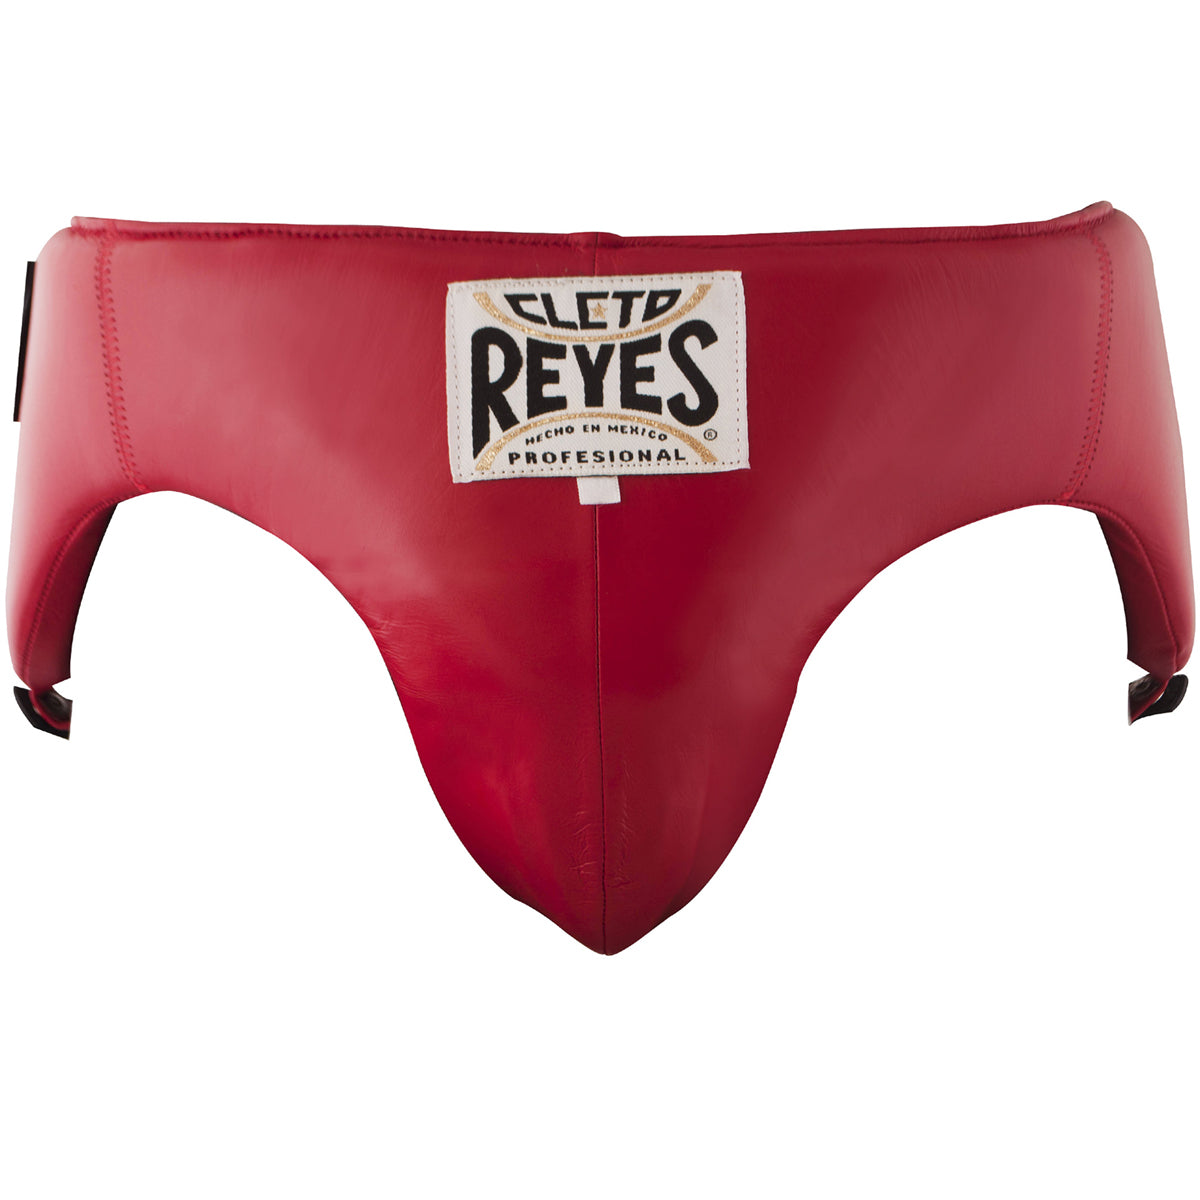 Cleto Reyes Traditional No-Foul Padded Protective Cup - XL (40 - 44") - Red Cleto Reyes